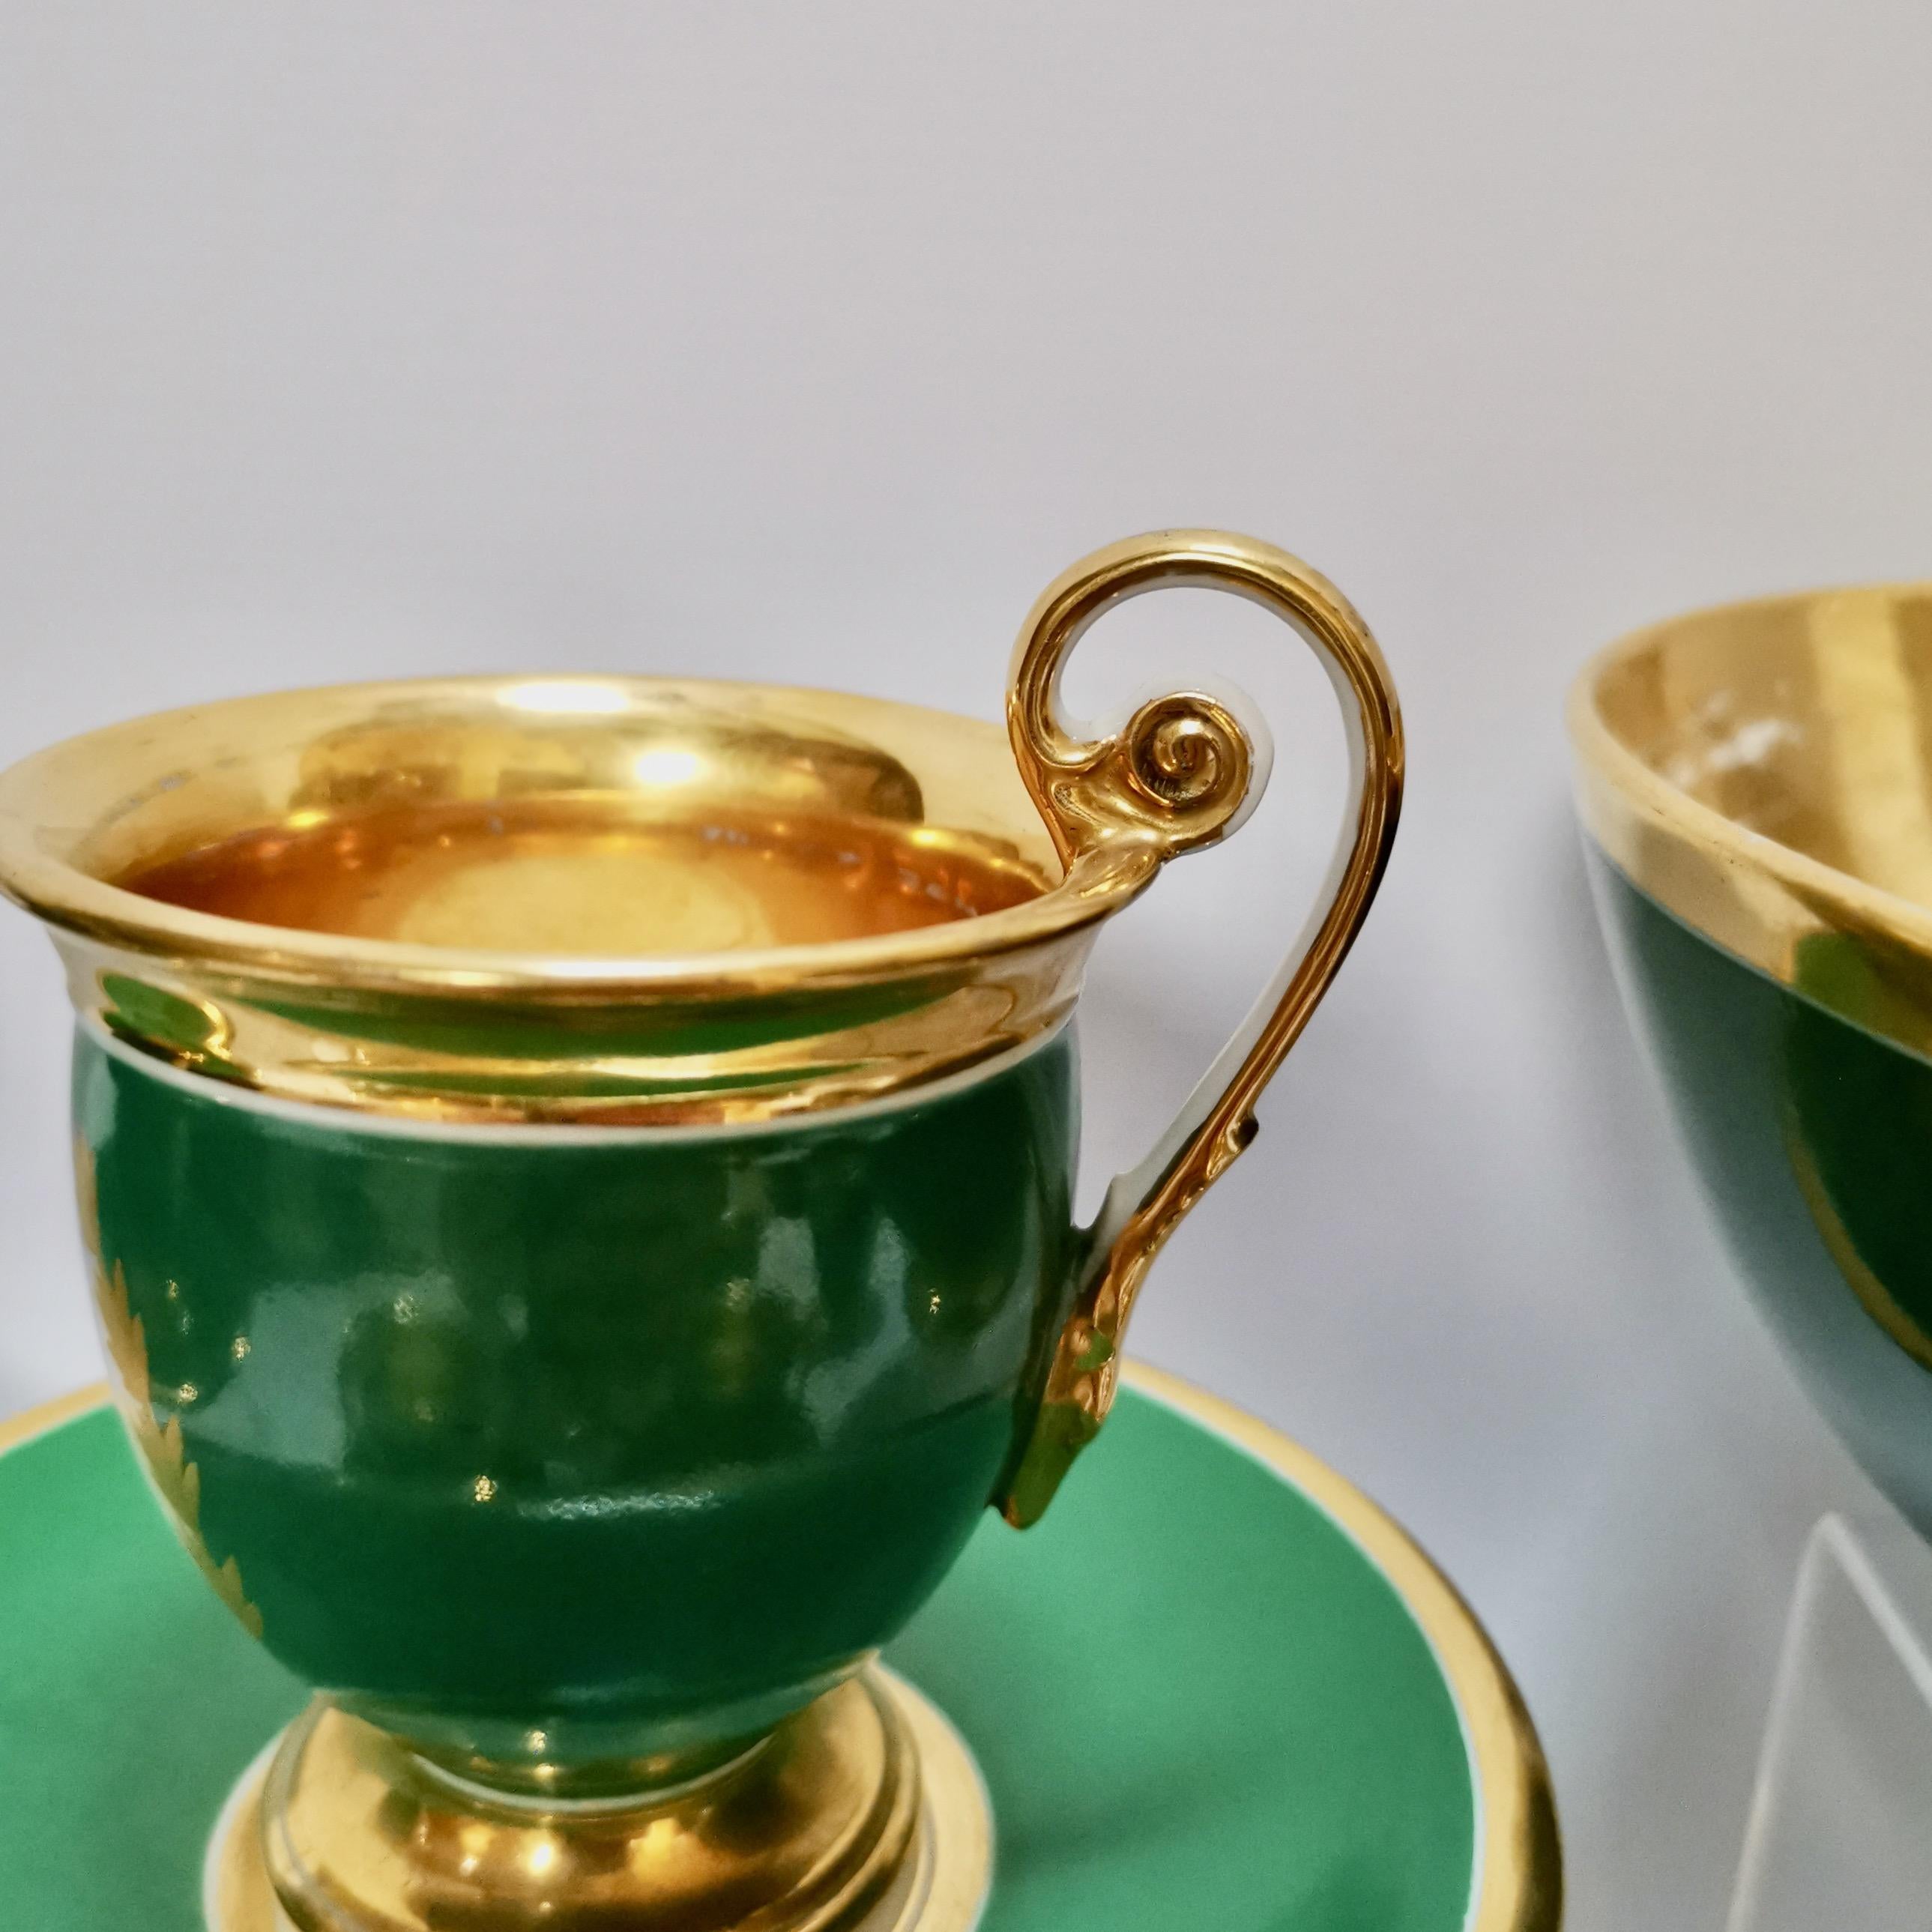 Paris Porcelain Coffee Service, Emerald Green and Floral, Empire Style ca 1820 7